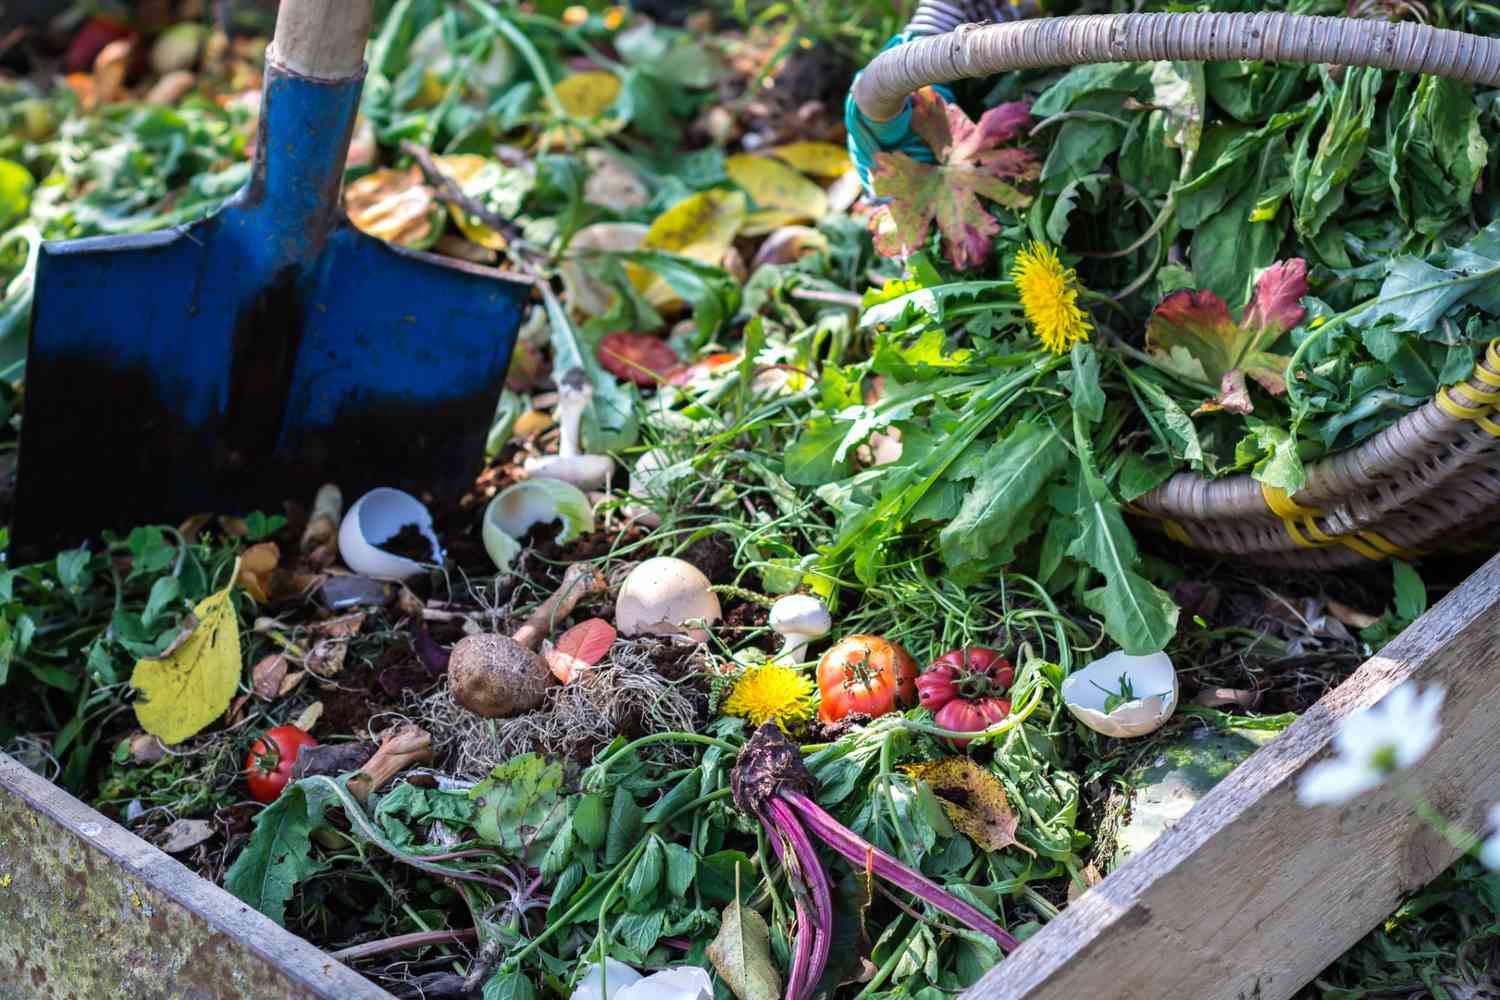 Is composting good for the ocean?